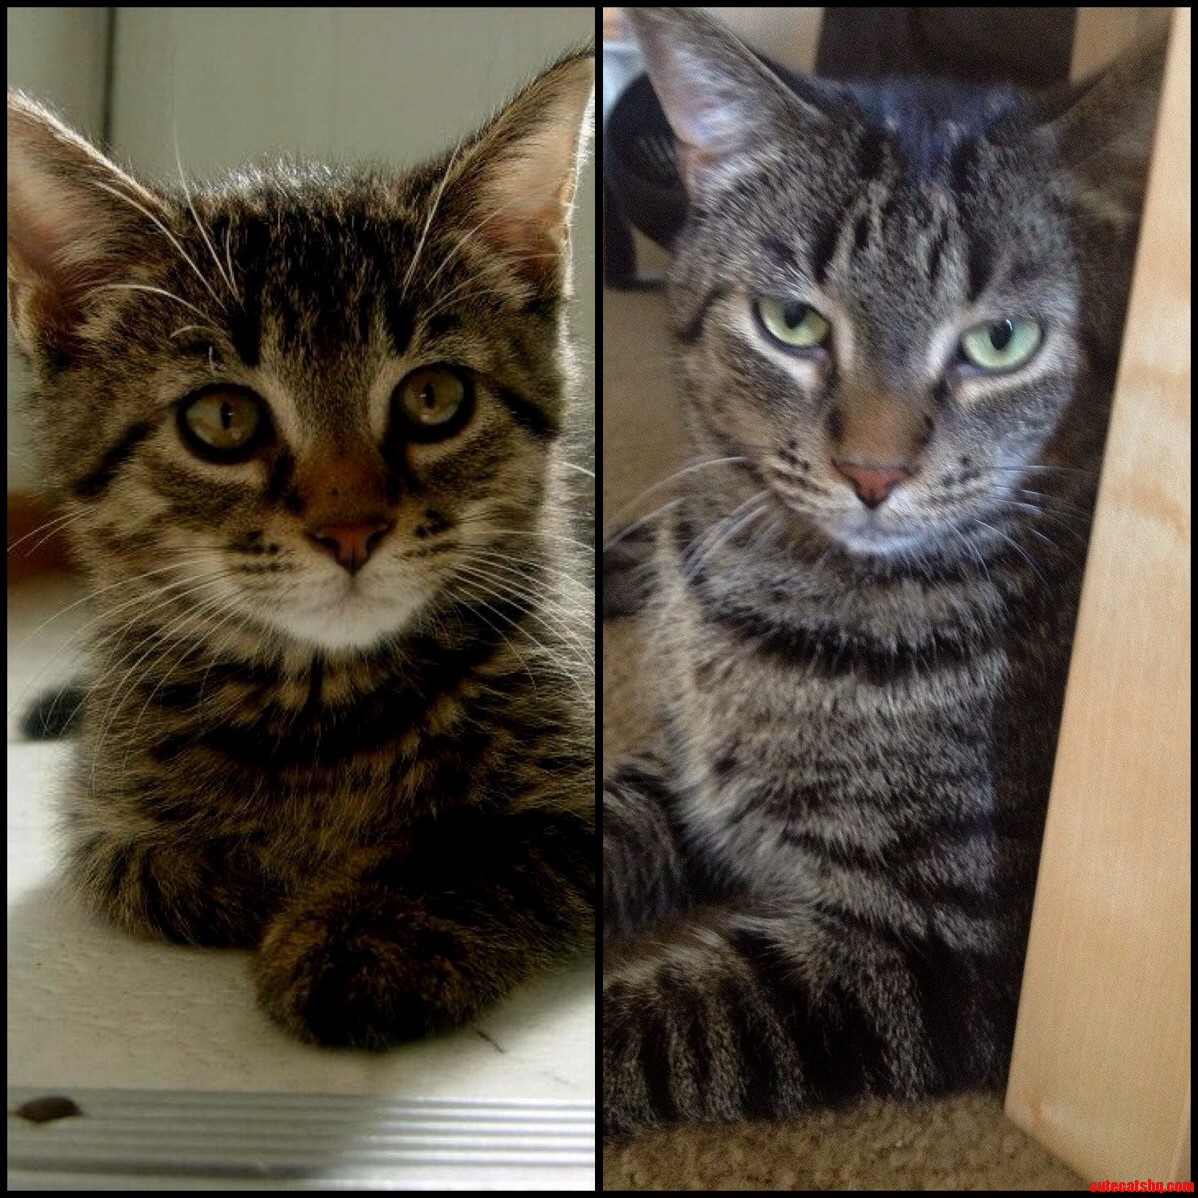 From A Sweet Tiny Kitten To A Mean Muggin Fatty